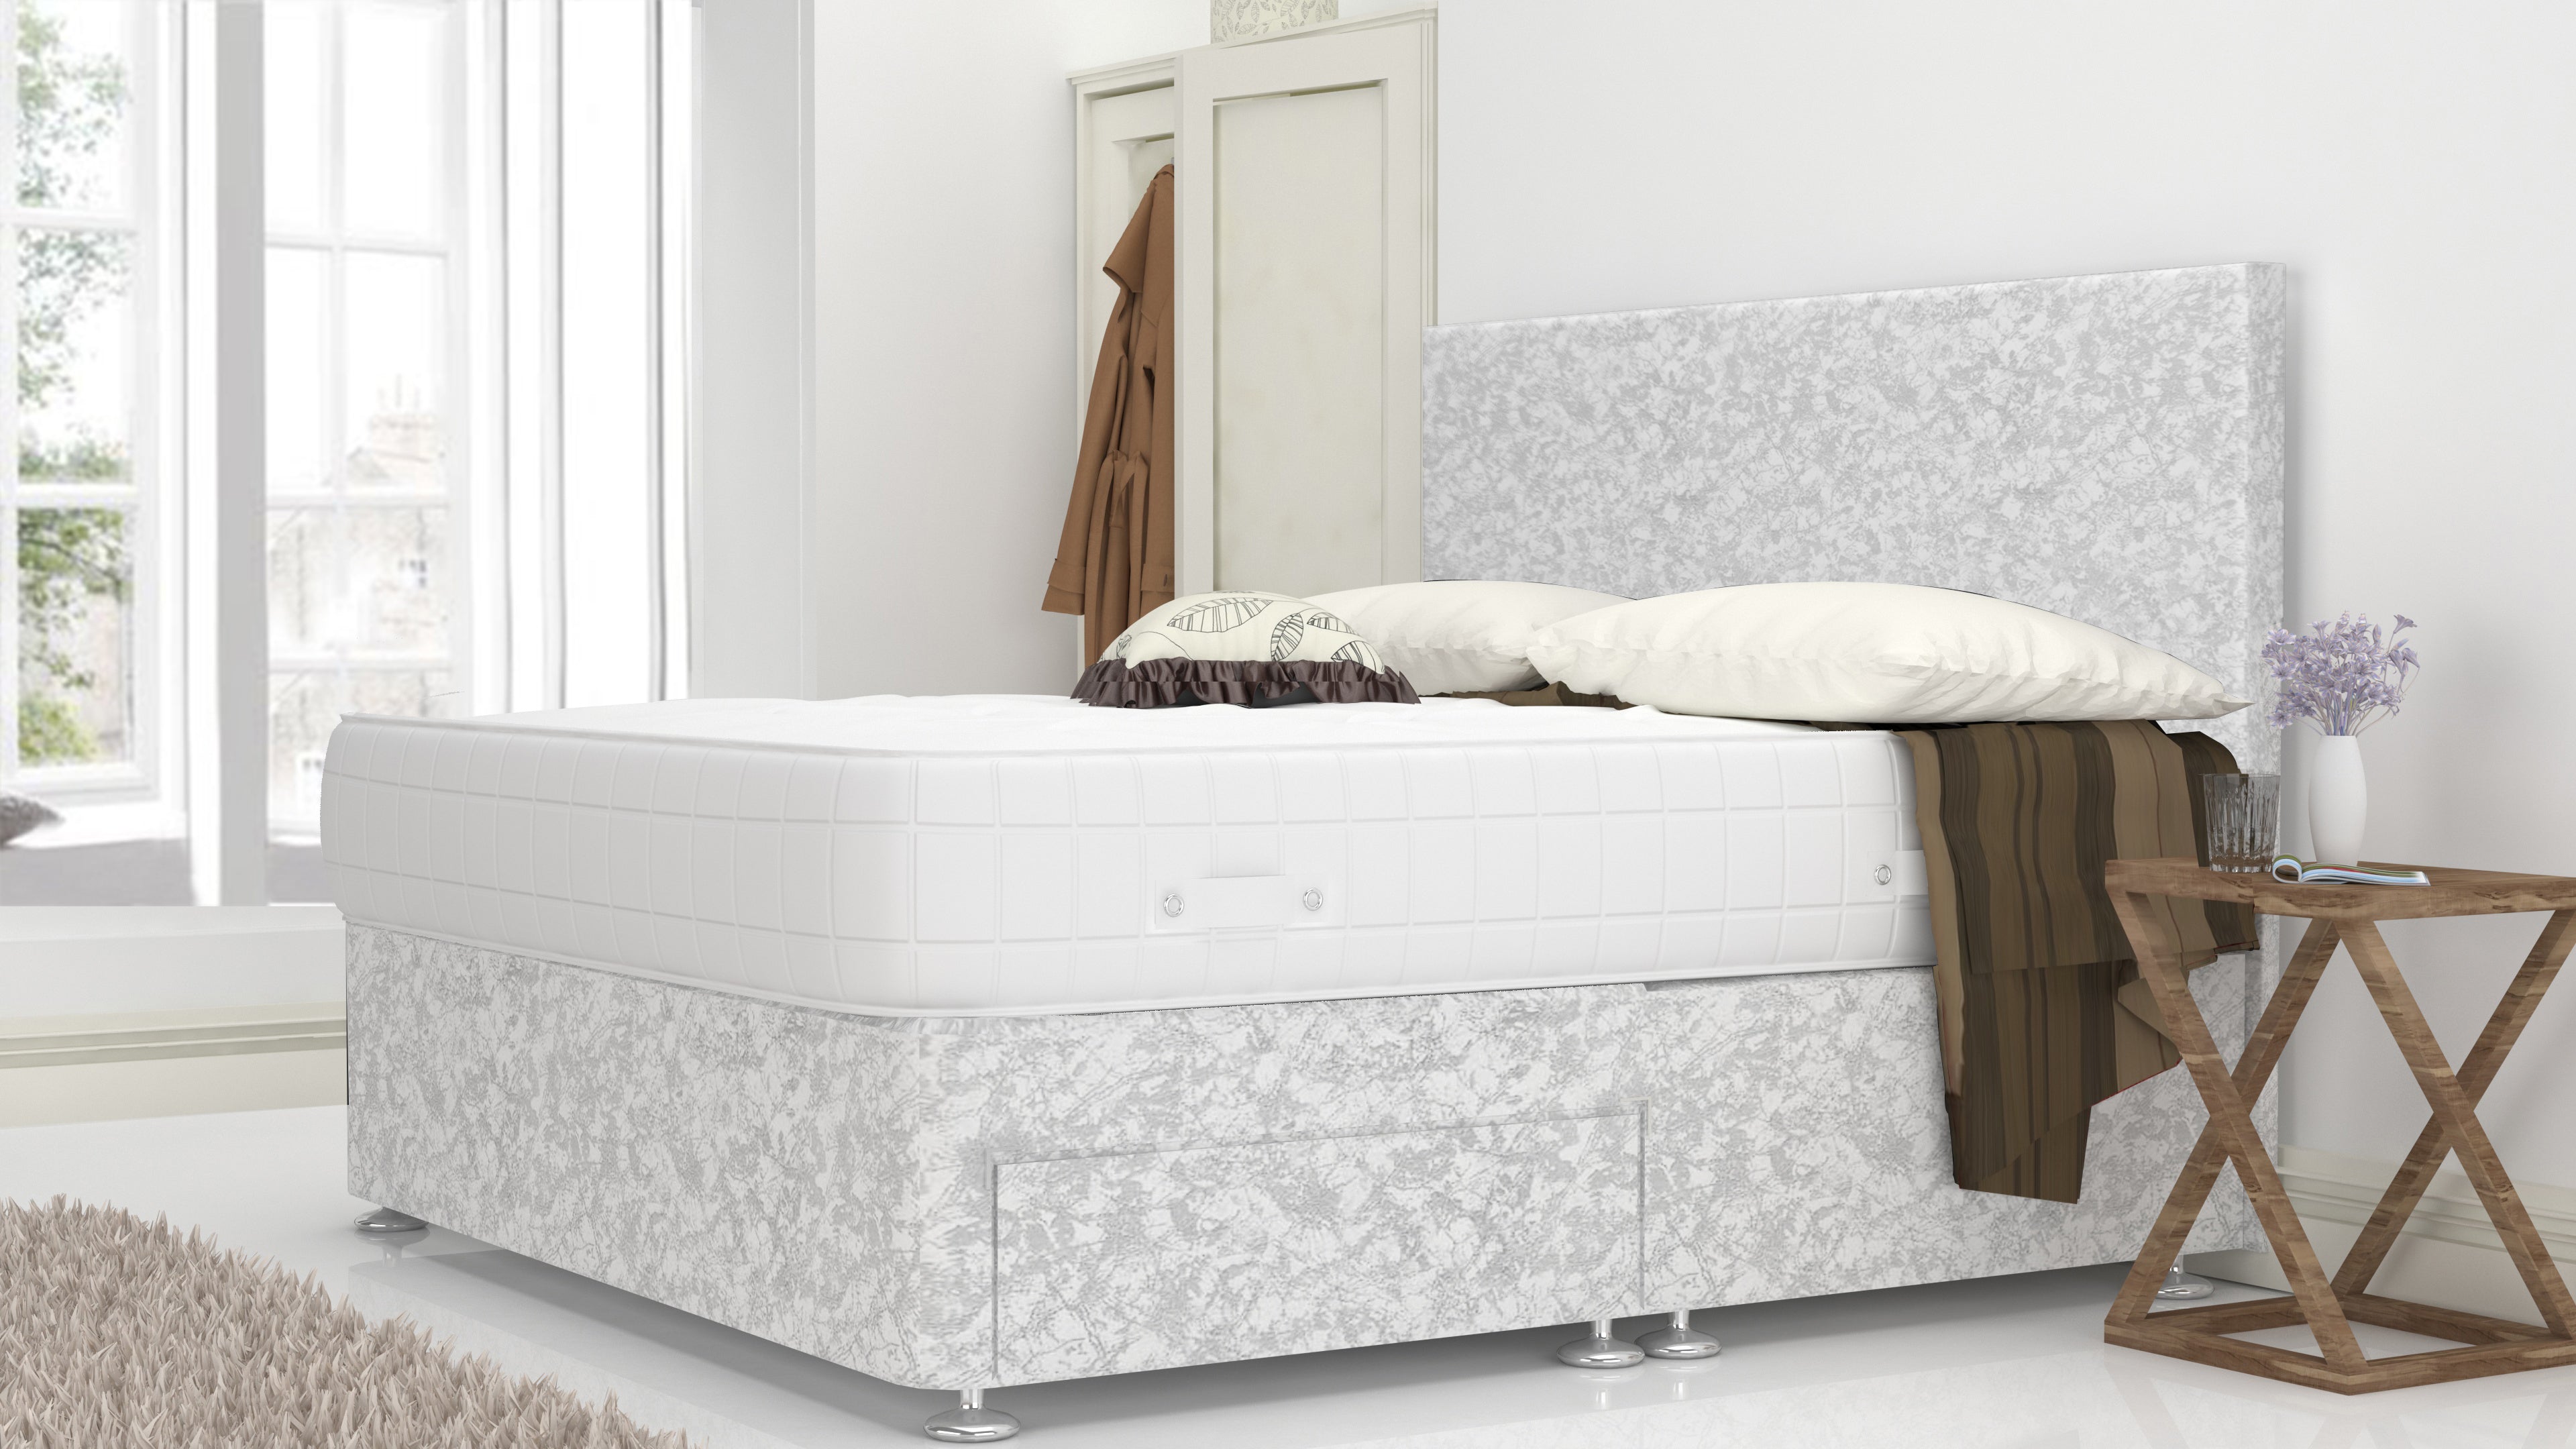 White Crushed Velvet 4 Feet Divan Bed With Plain Headboard (Included Feet) And Free Memory Foam Mattress